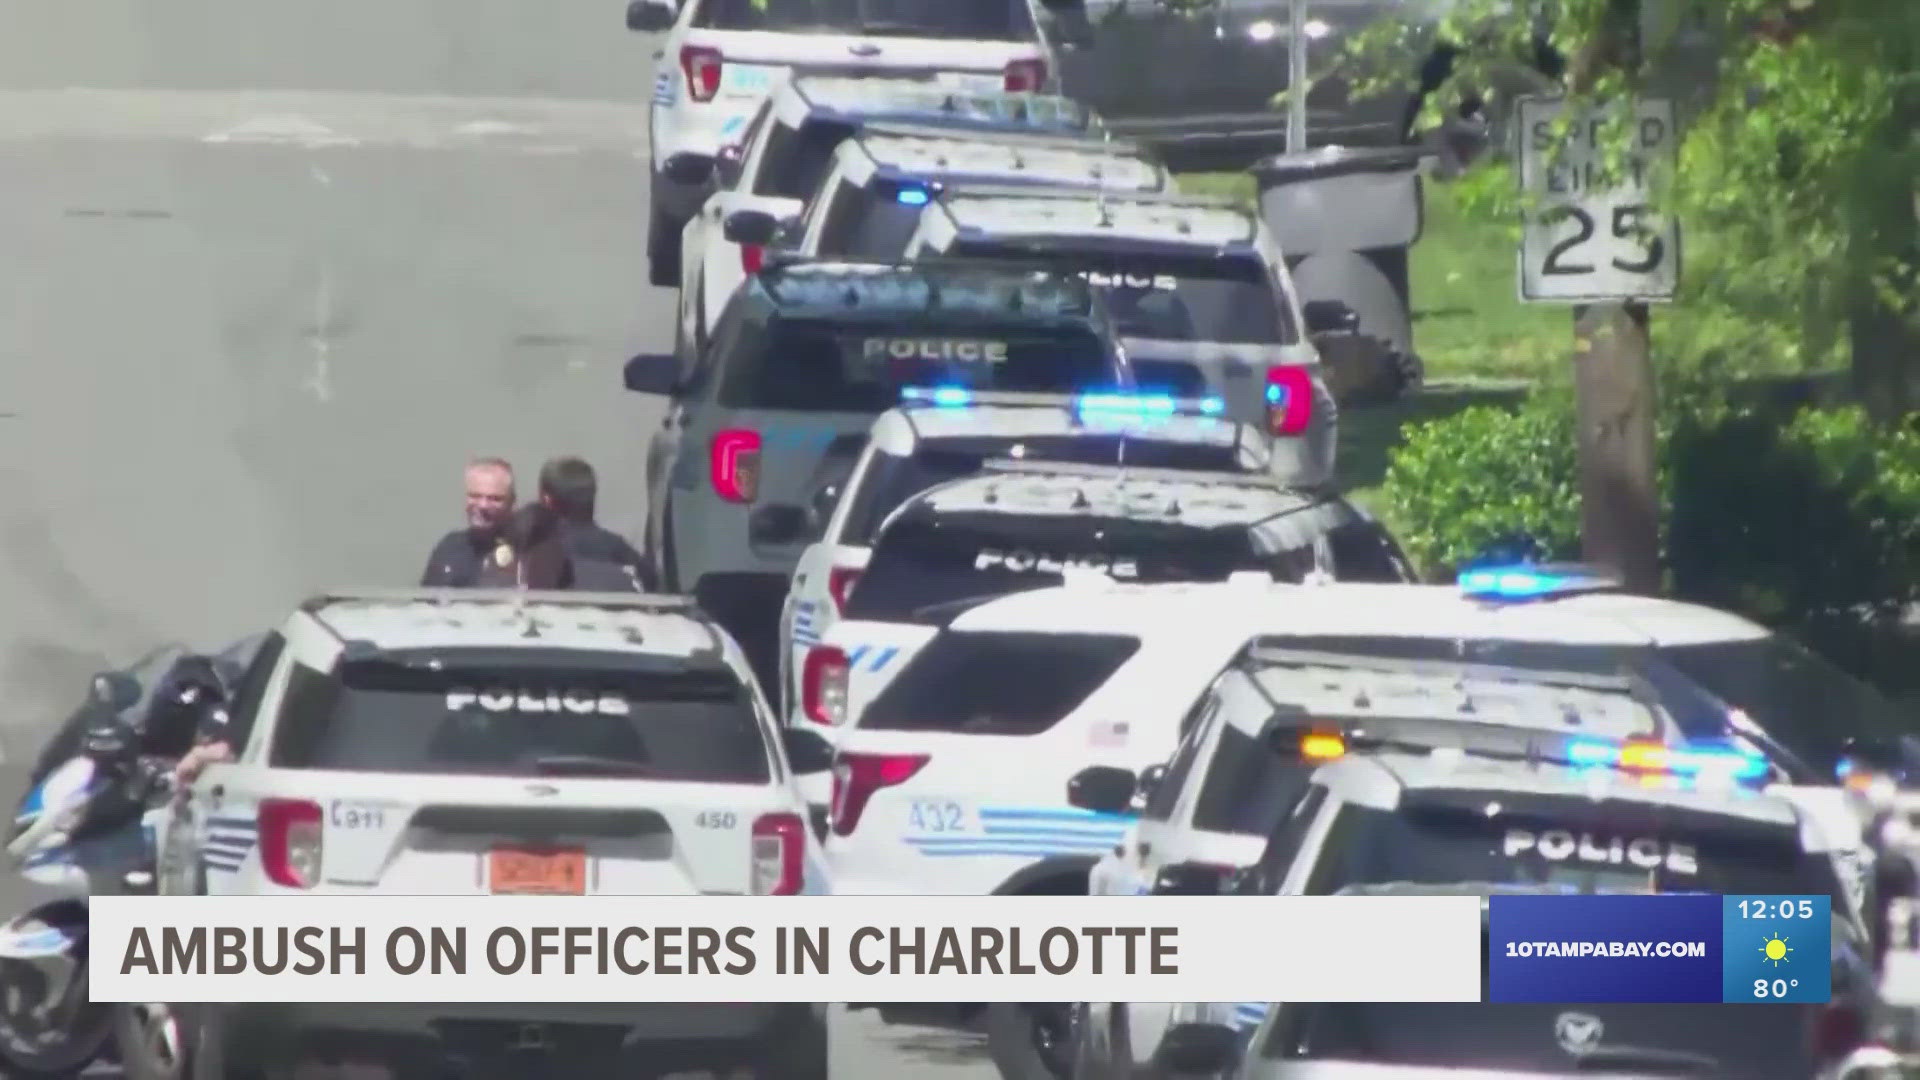 A total of eight law enforcement officers were shot, including three CMPD officers and one officer from the task force who were injured.